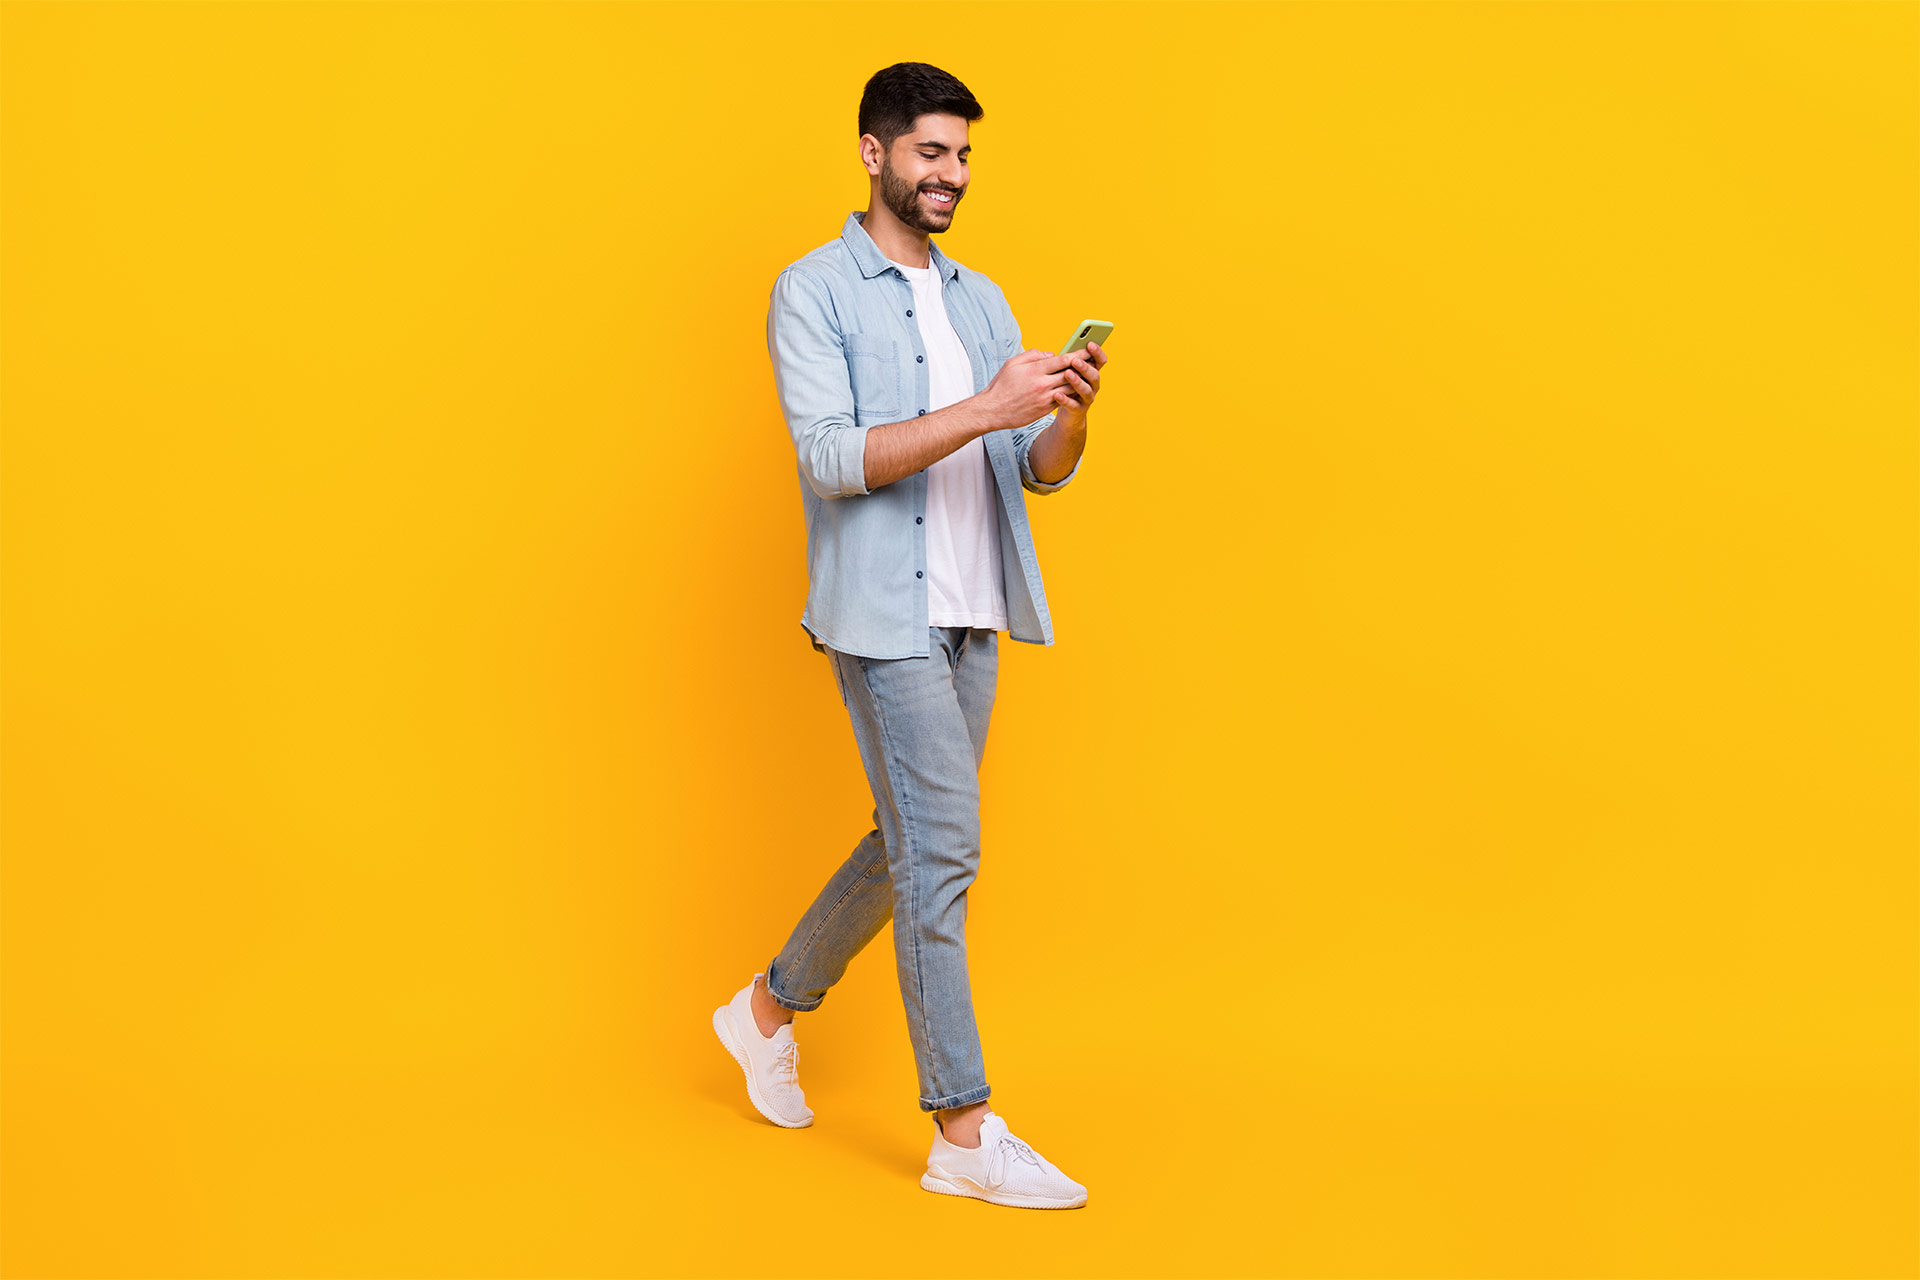 A cheerful young man in casual attire walking and looking at his smartphone against a bright yellow background.